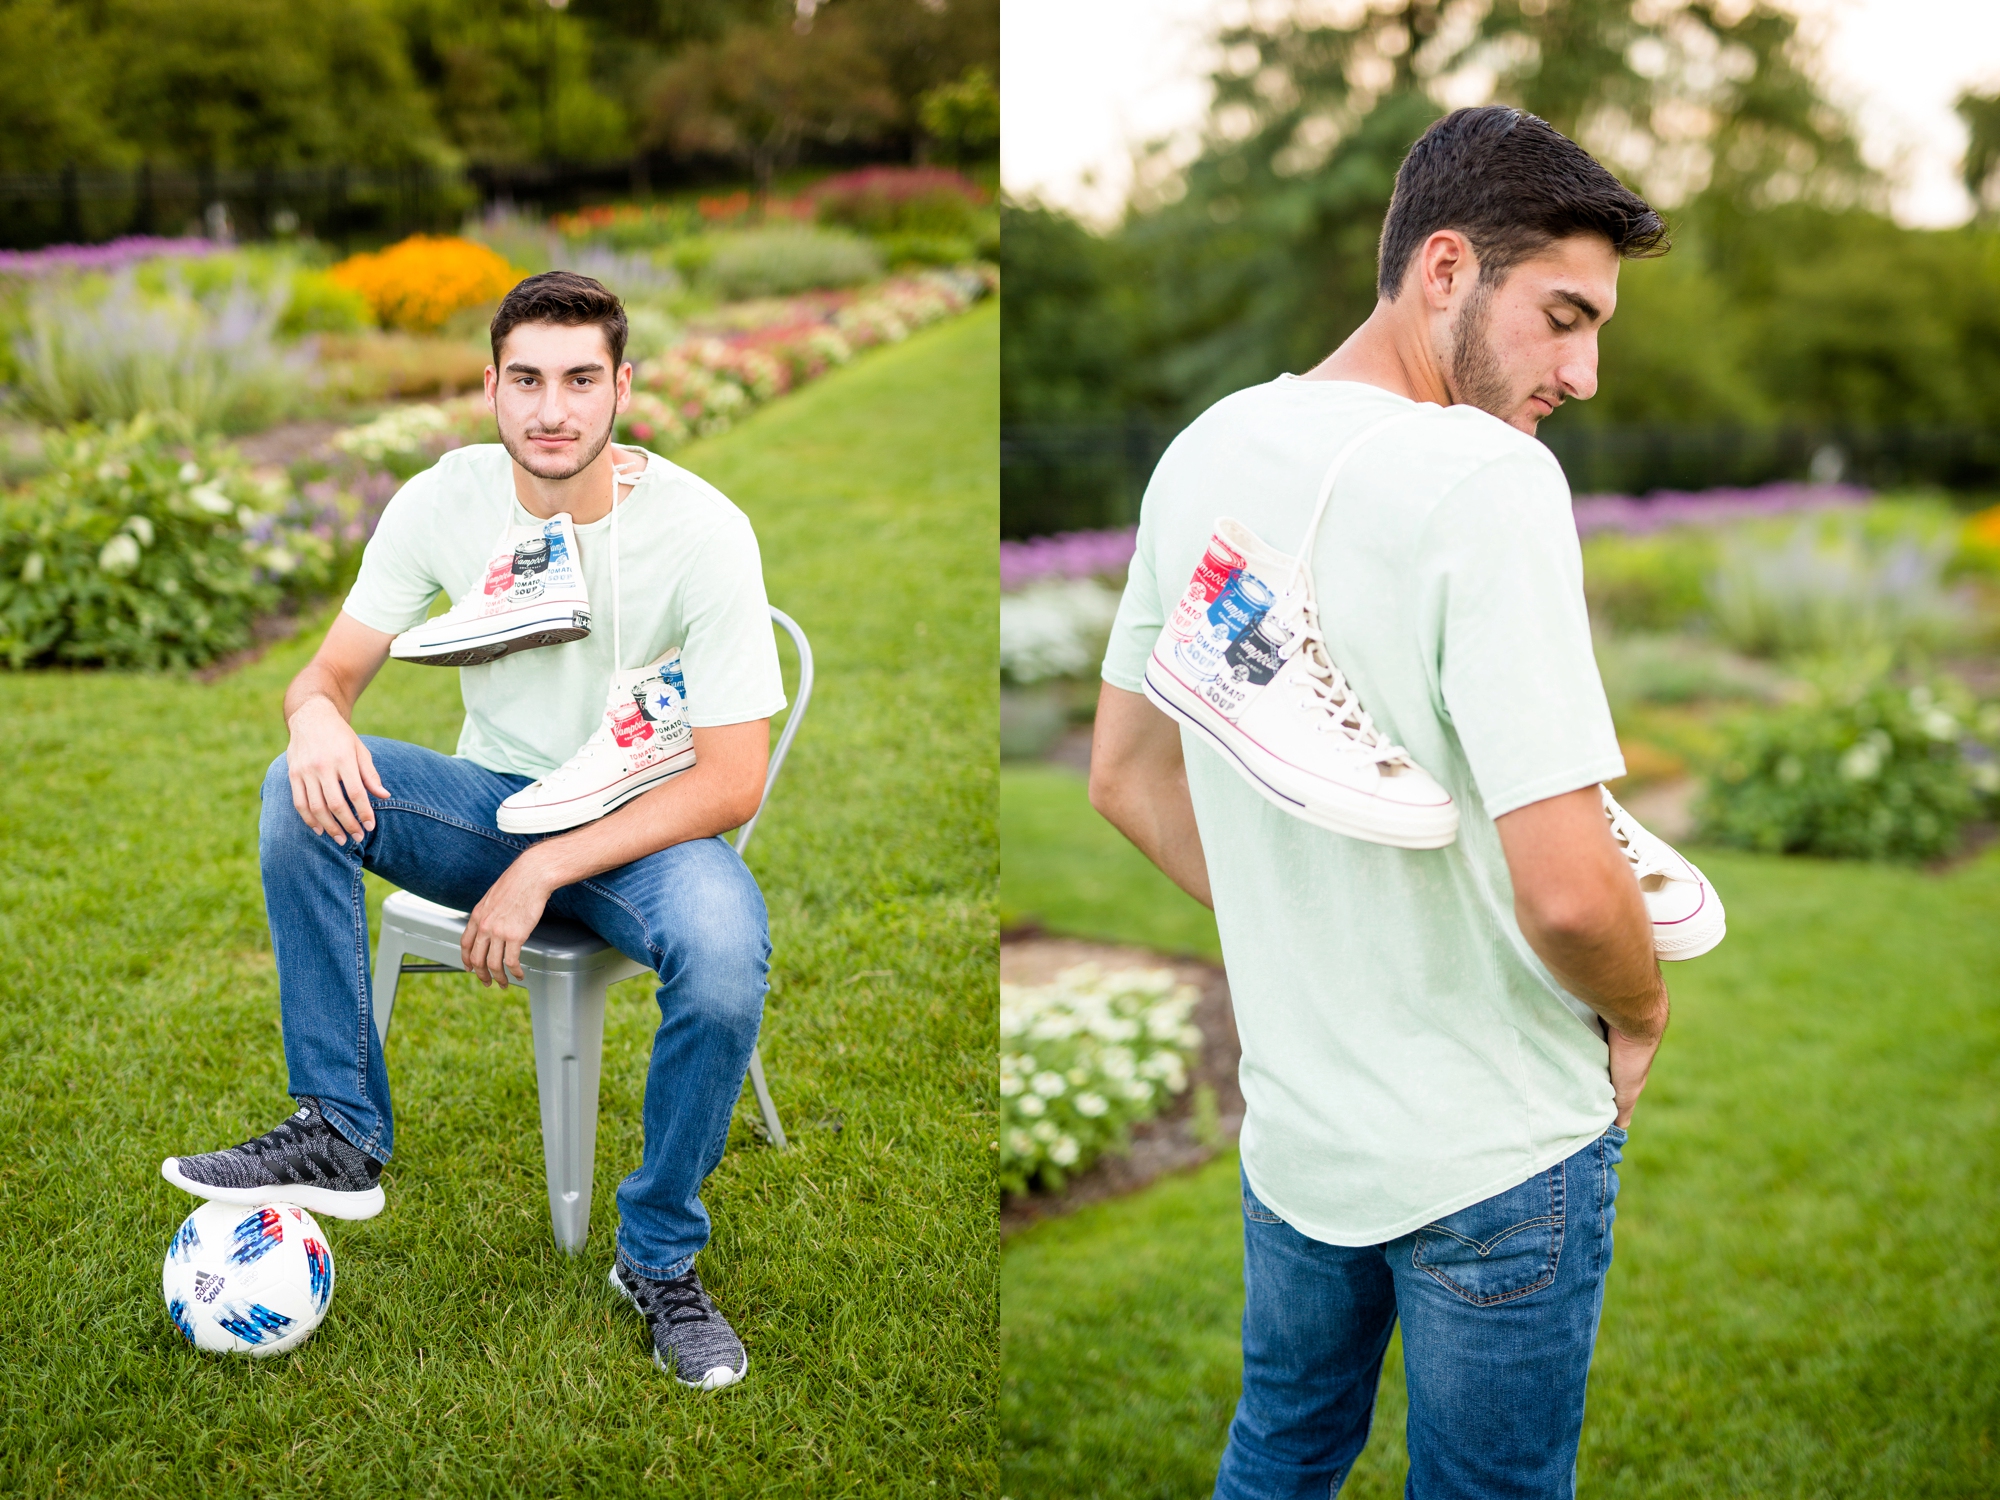 places to take senior pictures in pittsburgh, hartwood acres senior photos, pittsburgh senior photographer, best places to take senior pictures in pittsburgh